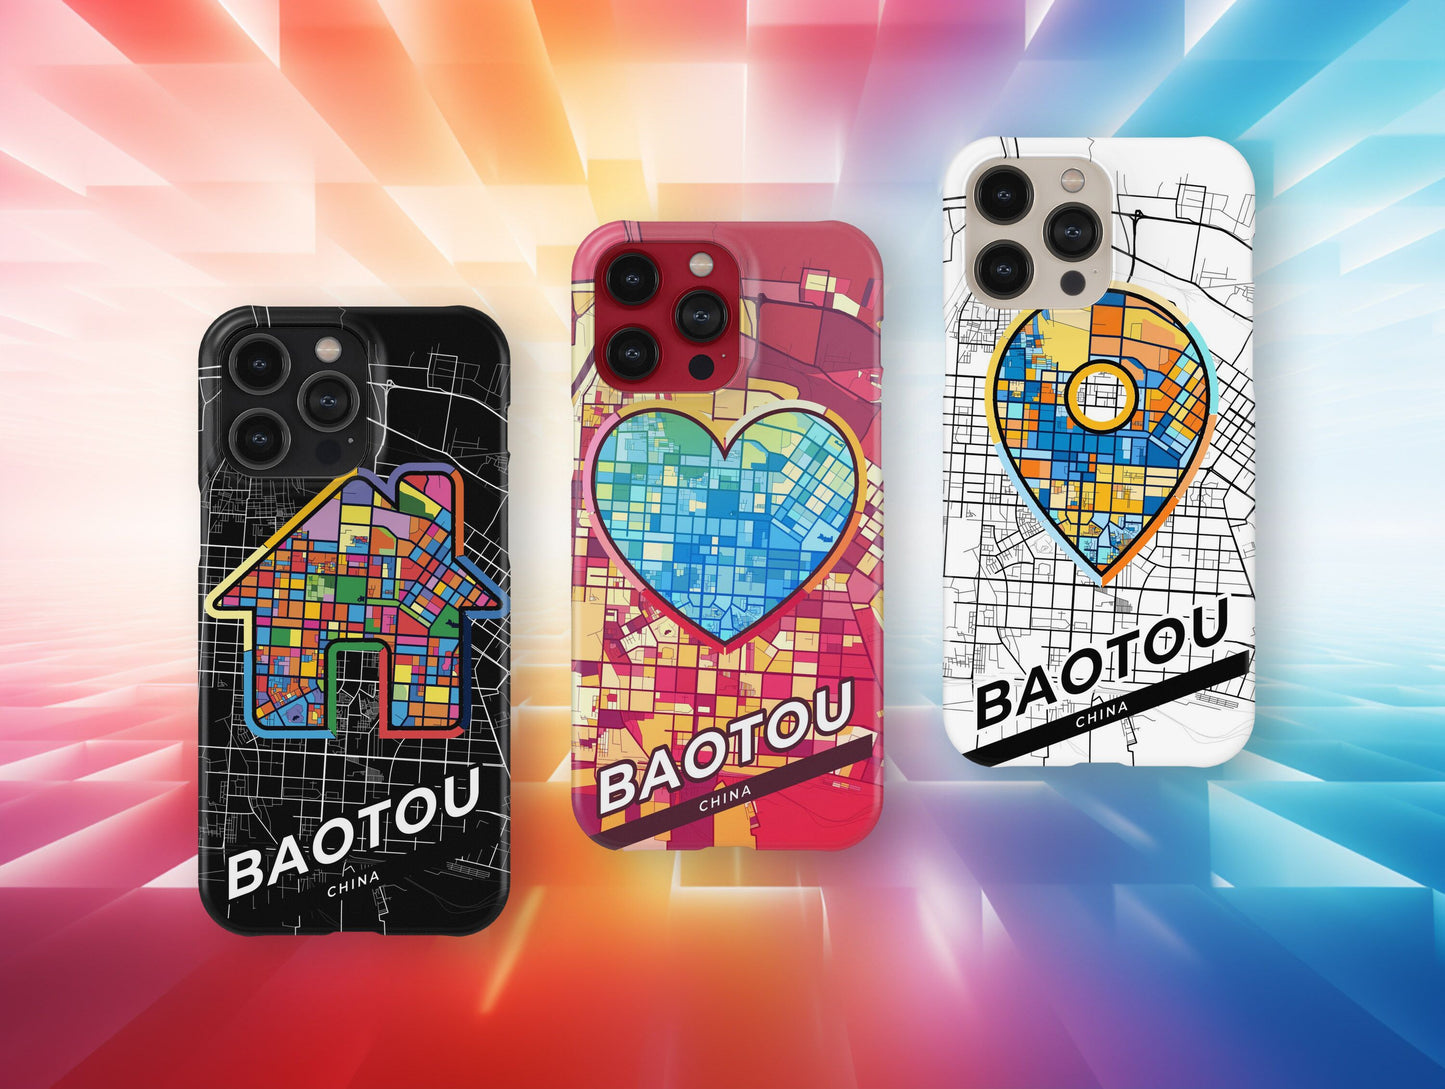 Baotou China slim phone case with colorful icon. Birthday, wedding or housewarming gift. Couple match cases.